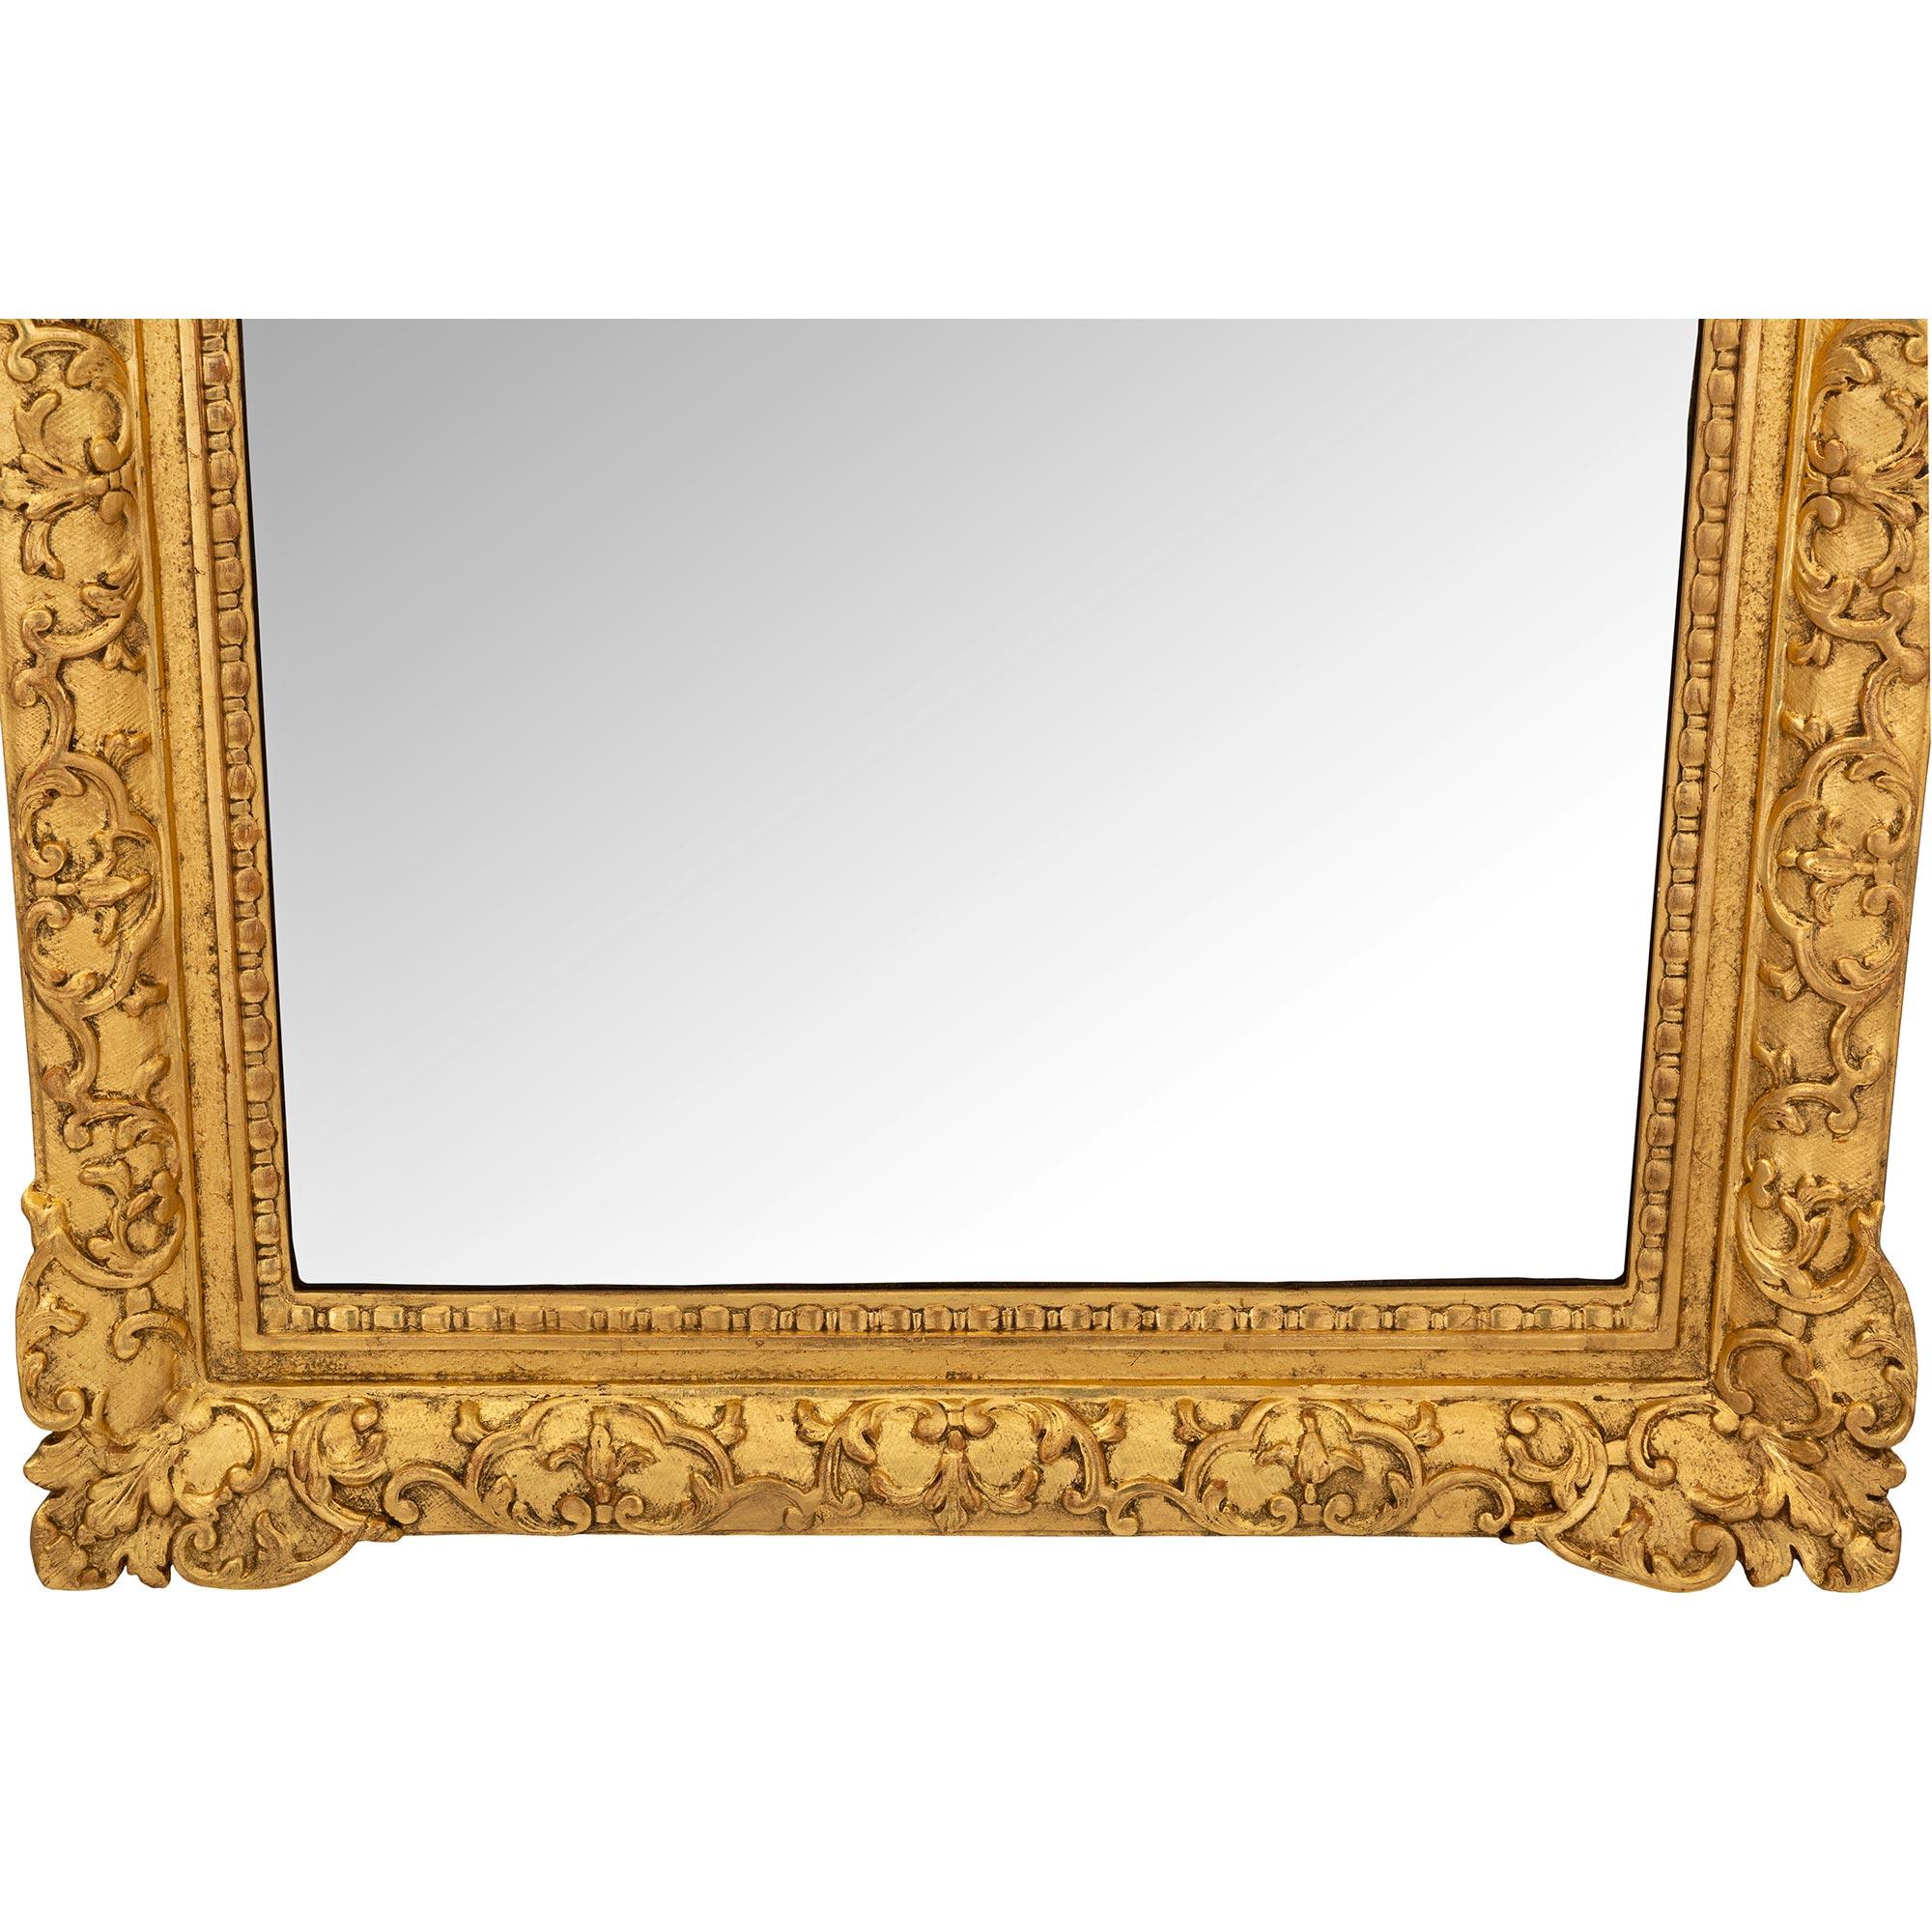 French Early 18th Century Régence Period Giltwood and Mecca Mirror For Sale 2